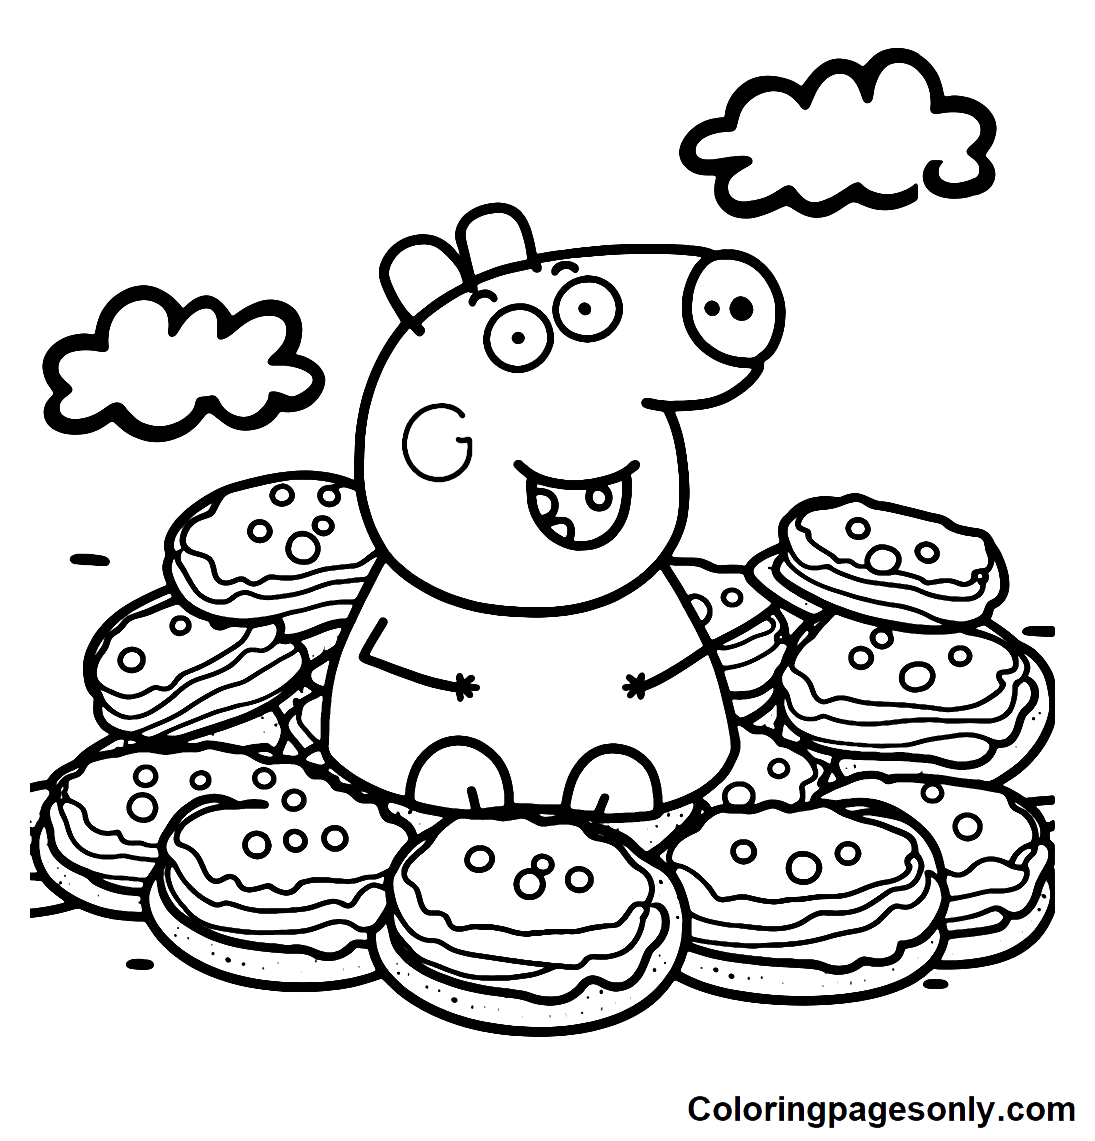 Peppa Pig sitting on a pile of Cookies Coloring Pages